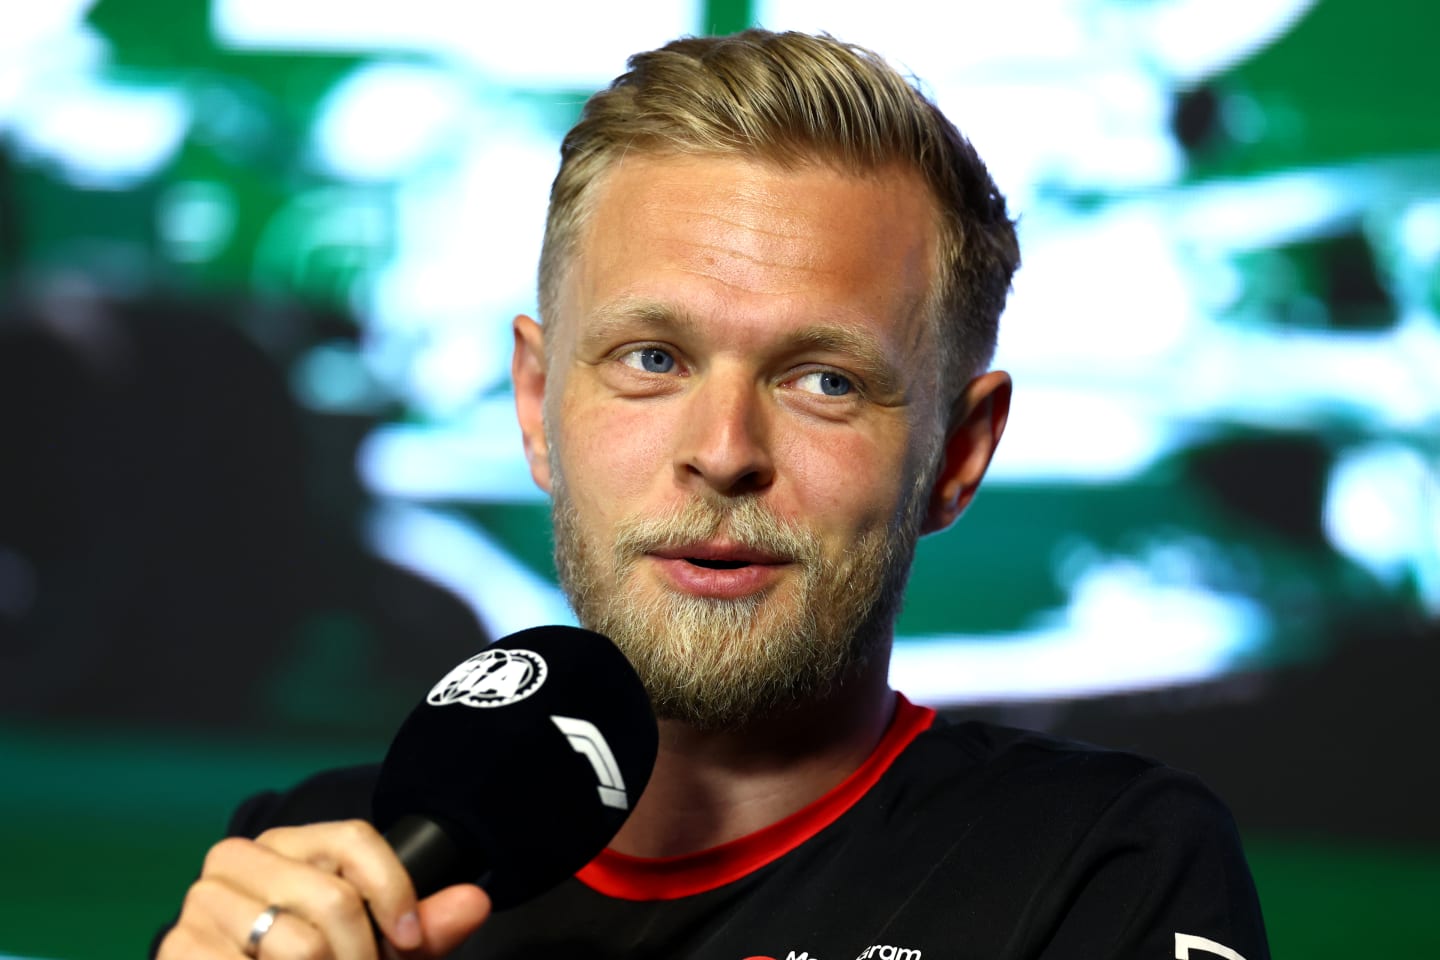 JEDDAH, SAUDI ARABIA - MARCH 16: Kevin Magnussen of Denmark and Haas F1 attends the Drivers Press Conference during previews ahead of the F1 Grand Prix of Saudi Arabia at Jeddah Corniche Circuit on March 16, 2023 in Jeddah, Saudi Arabia. (Photo by Bryn Lennon/Getty Images)